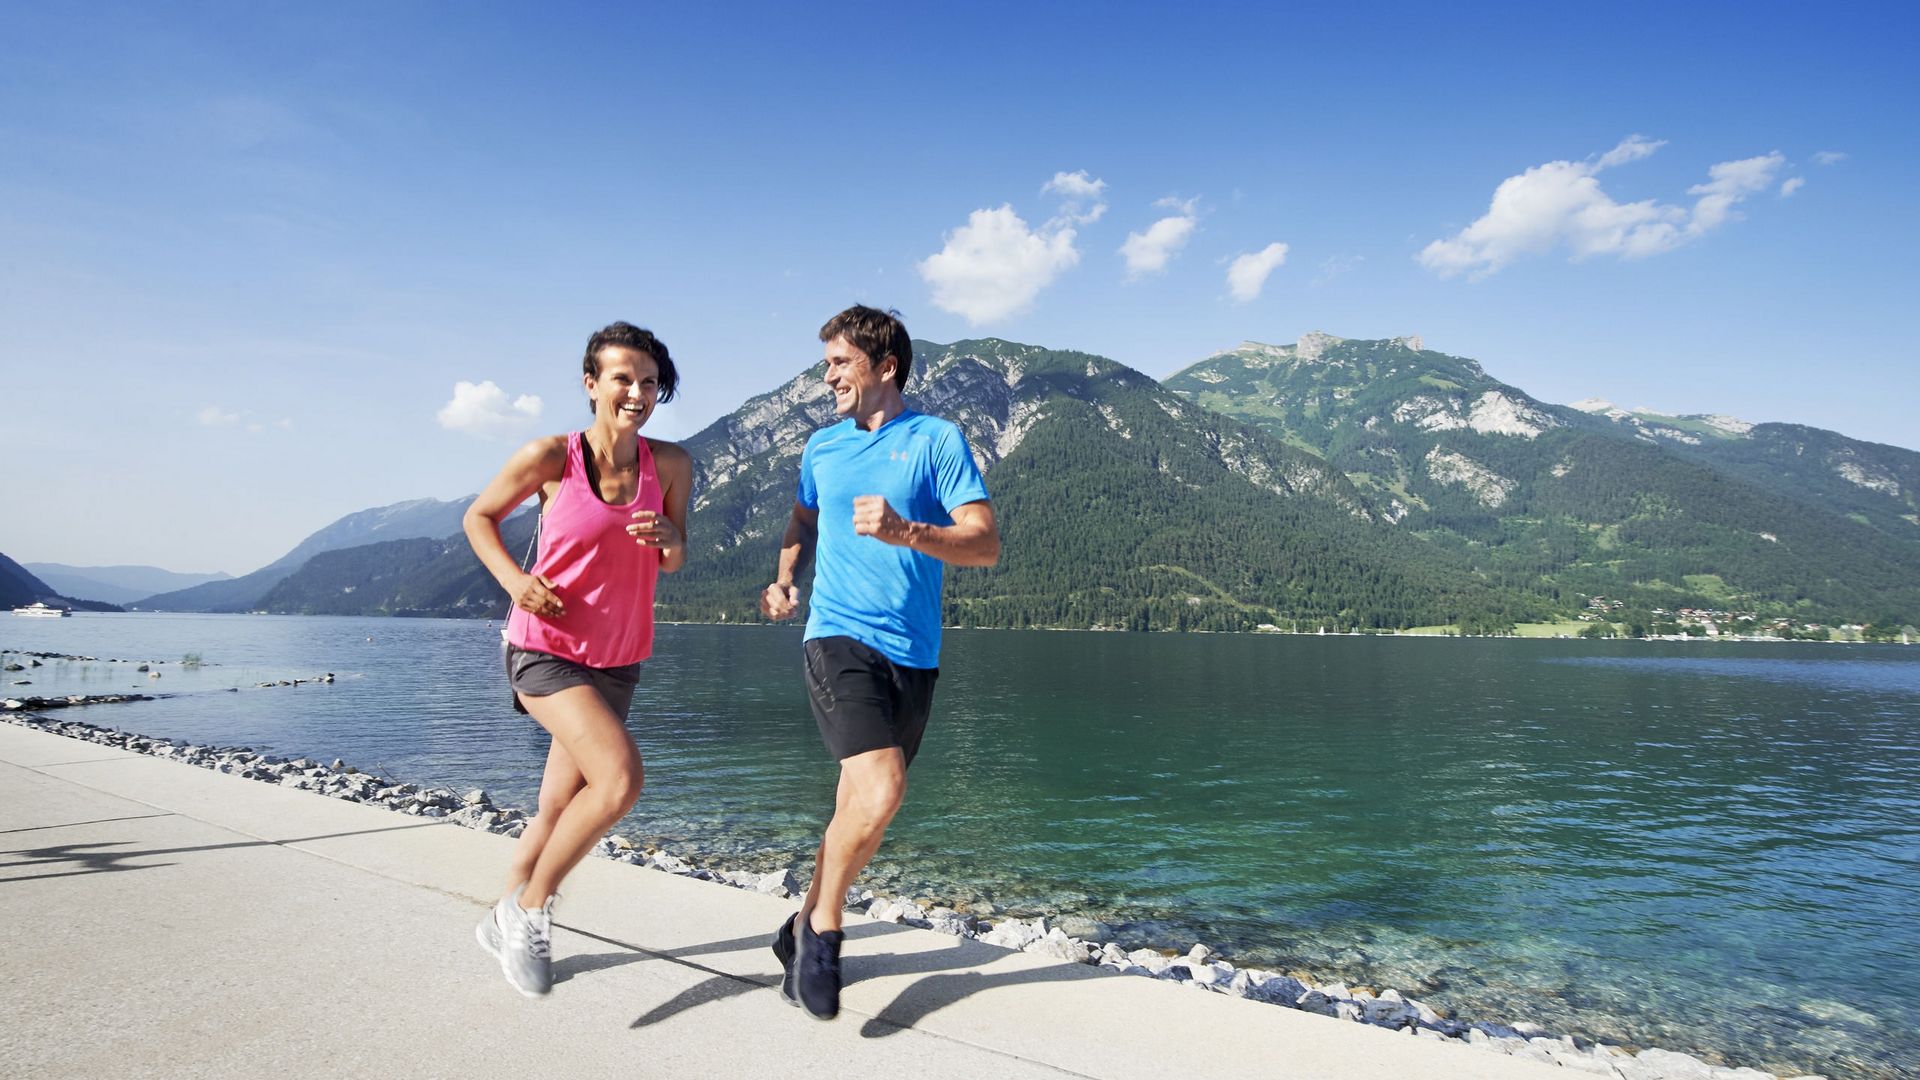 Joggers on the Lake Achensee promenade on holidays at the lake in Austria